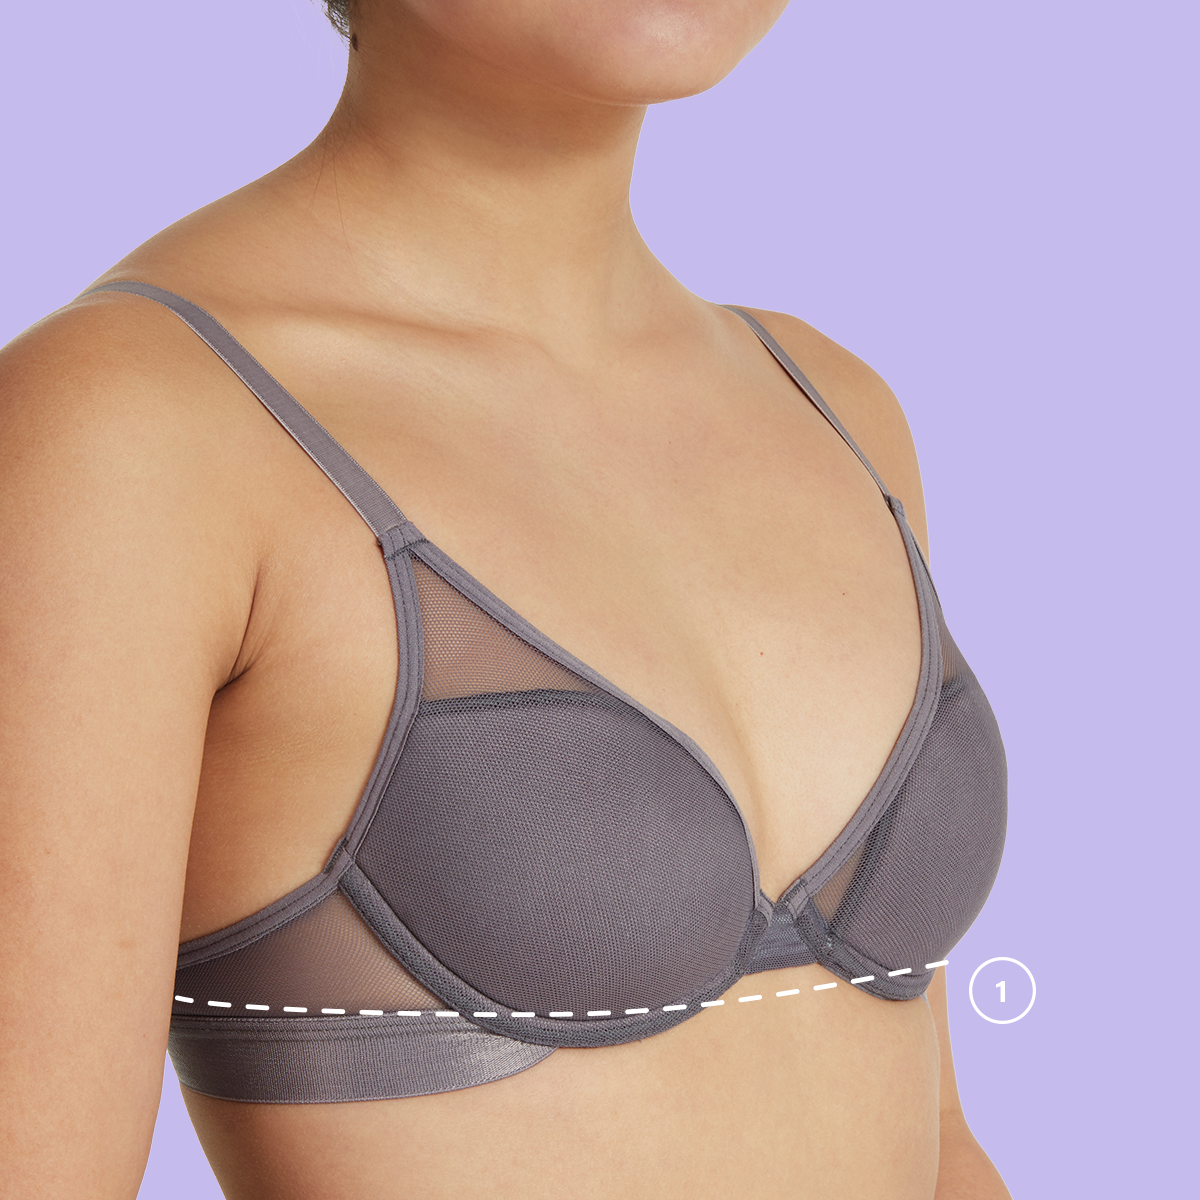 PSA: You are probably wearing a bra that does not fit right now